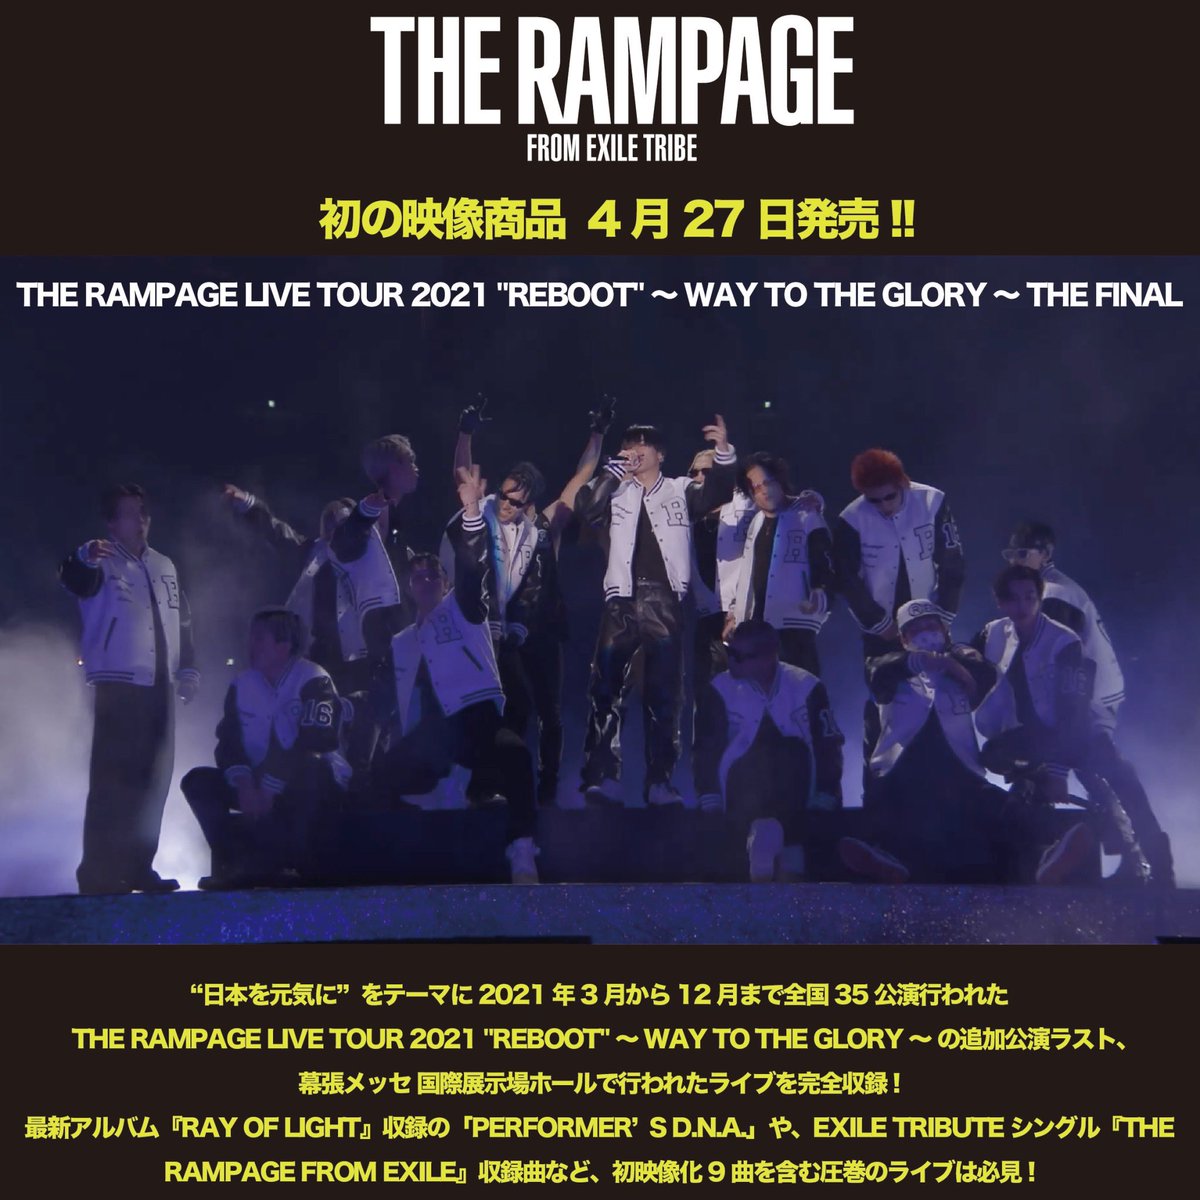 Tweets with replies by THE RAMPAGE CREW PH ???????? (@RMPG_CrewPH) / Twitter